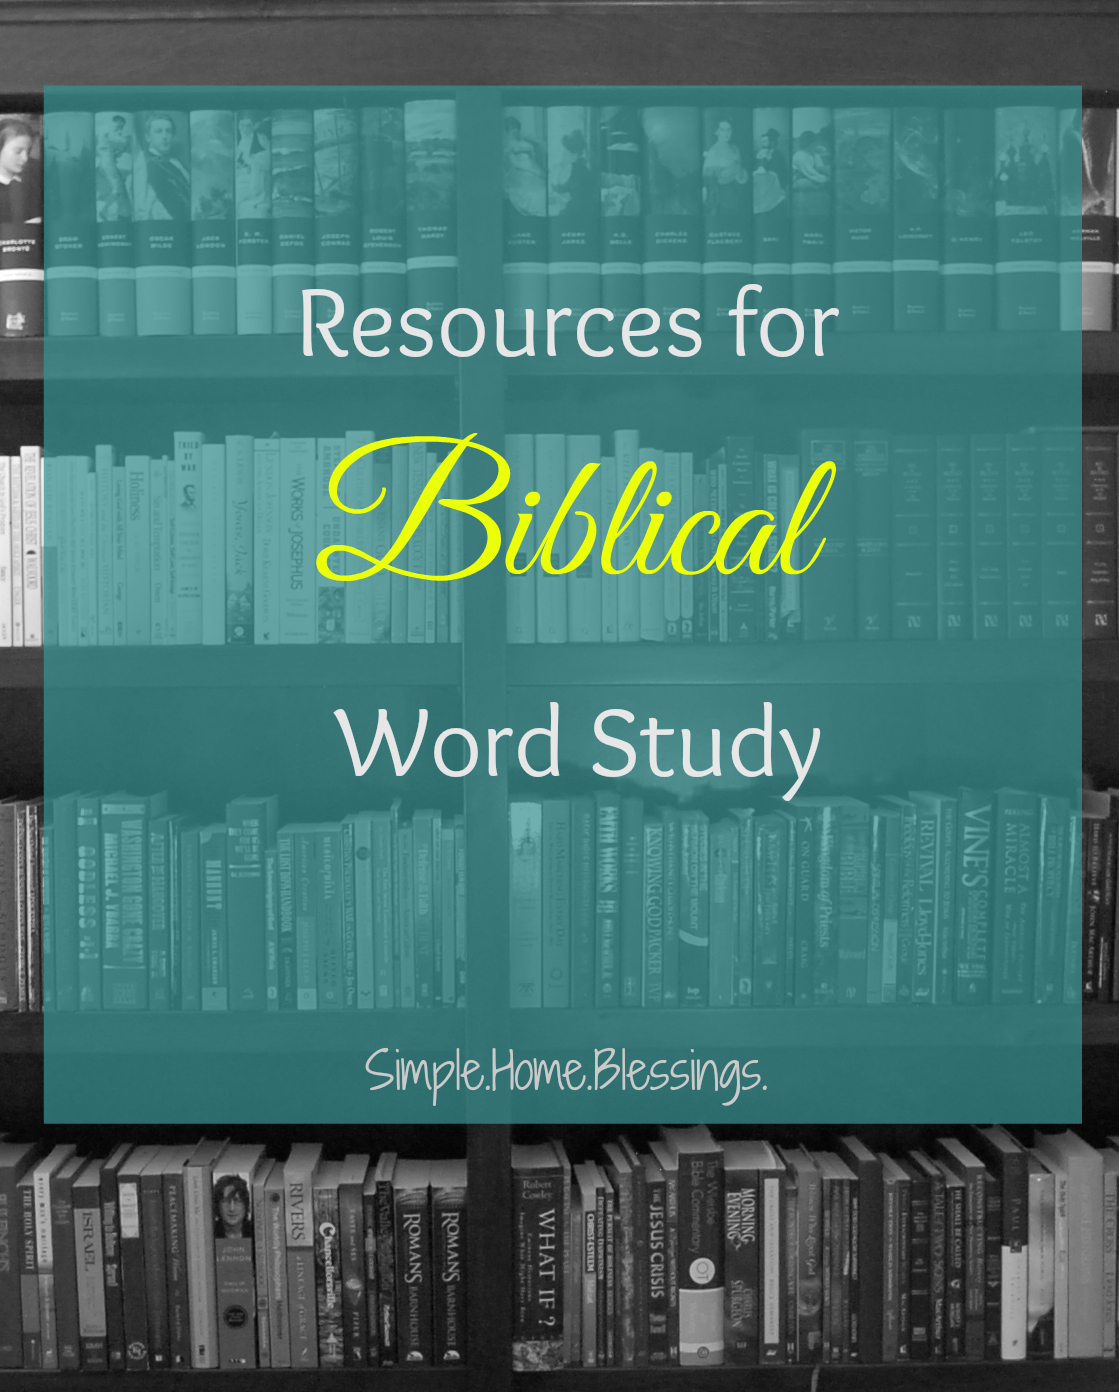 Resources for Biblical word study - the tools you need to discover what the Bible really says